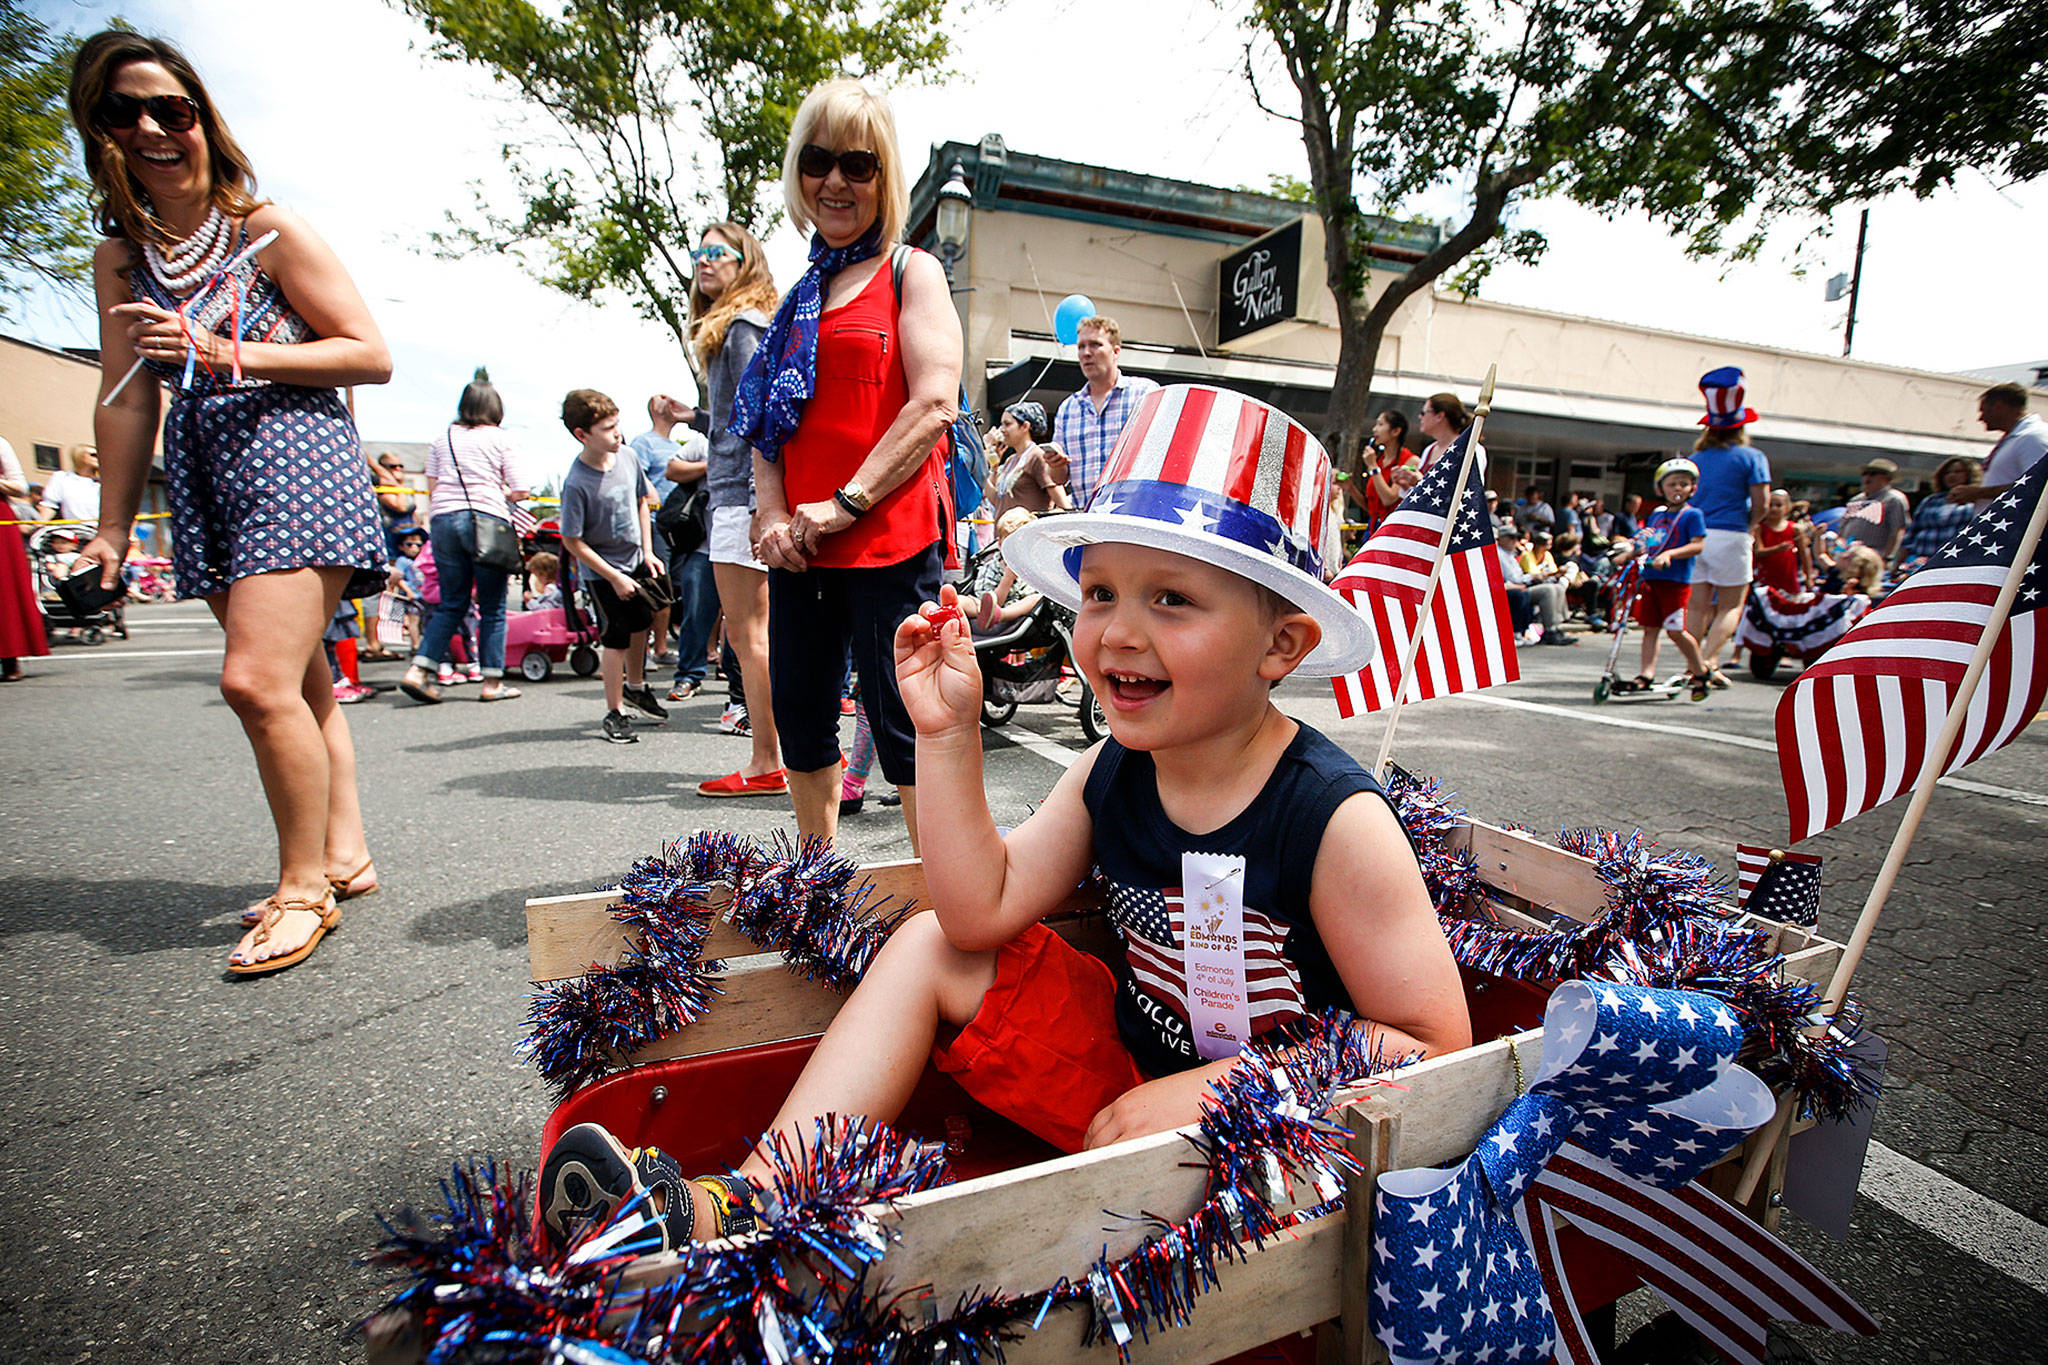 Jackson Emerick, 4, of Shoreline, tosses candy out to crowds lining Main Street in downtown Edmonds during the Edmonds Kind of Fourth Parade on Tuesday. (Ian Terry / The Herald)